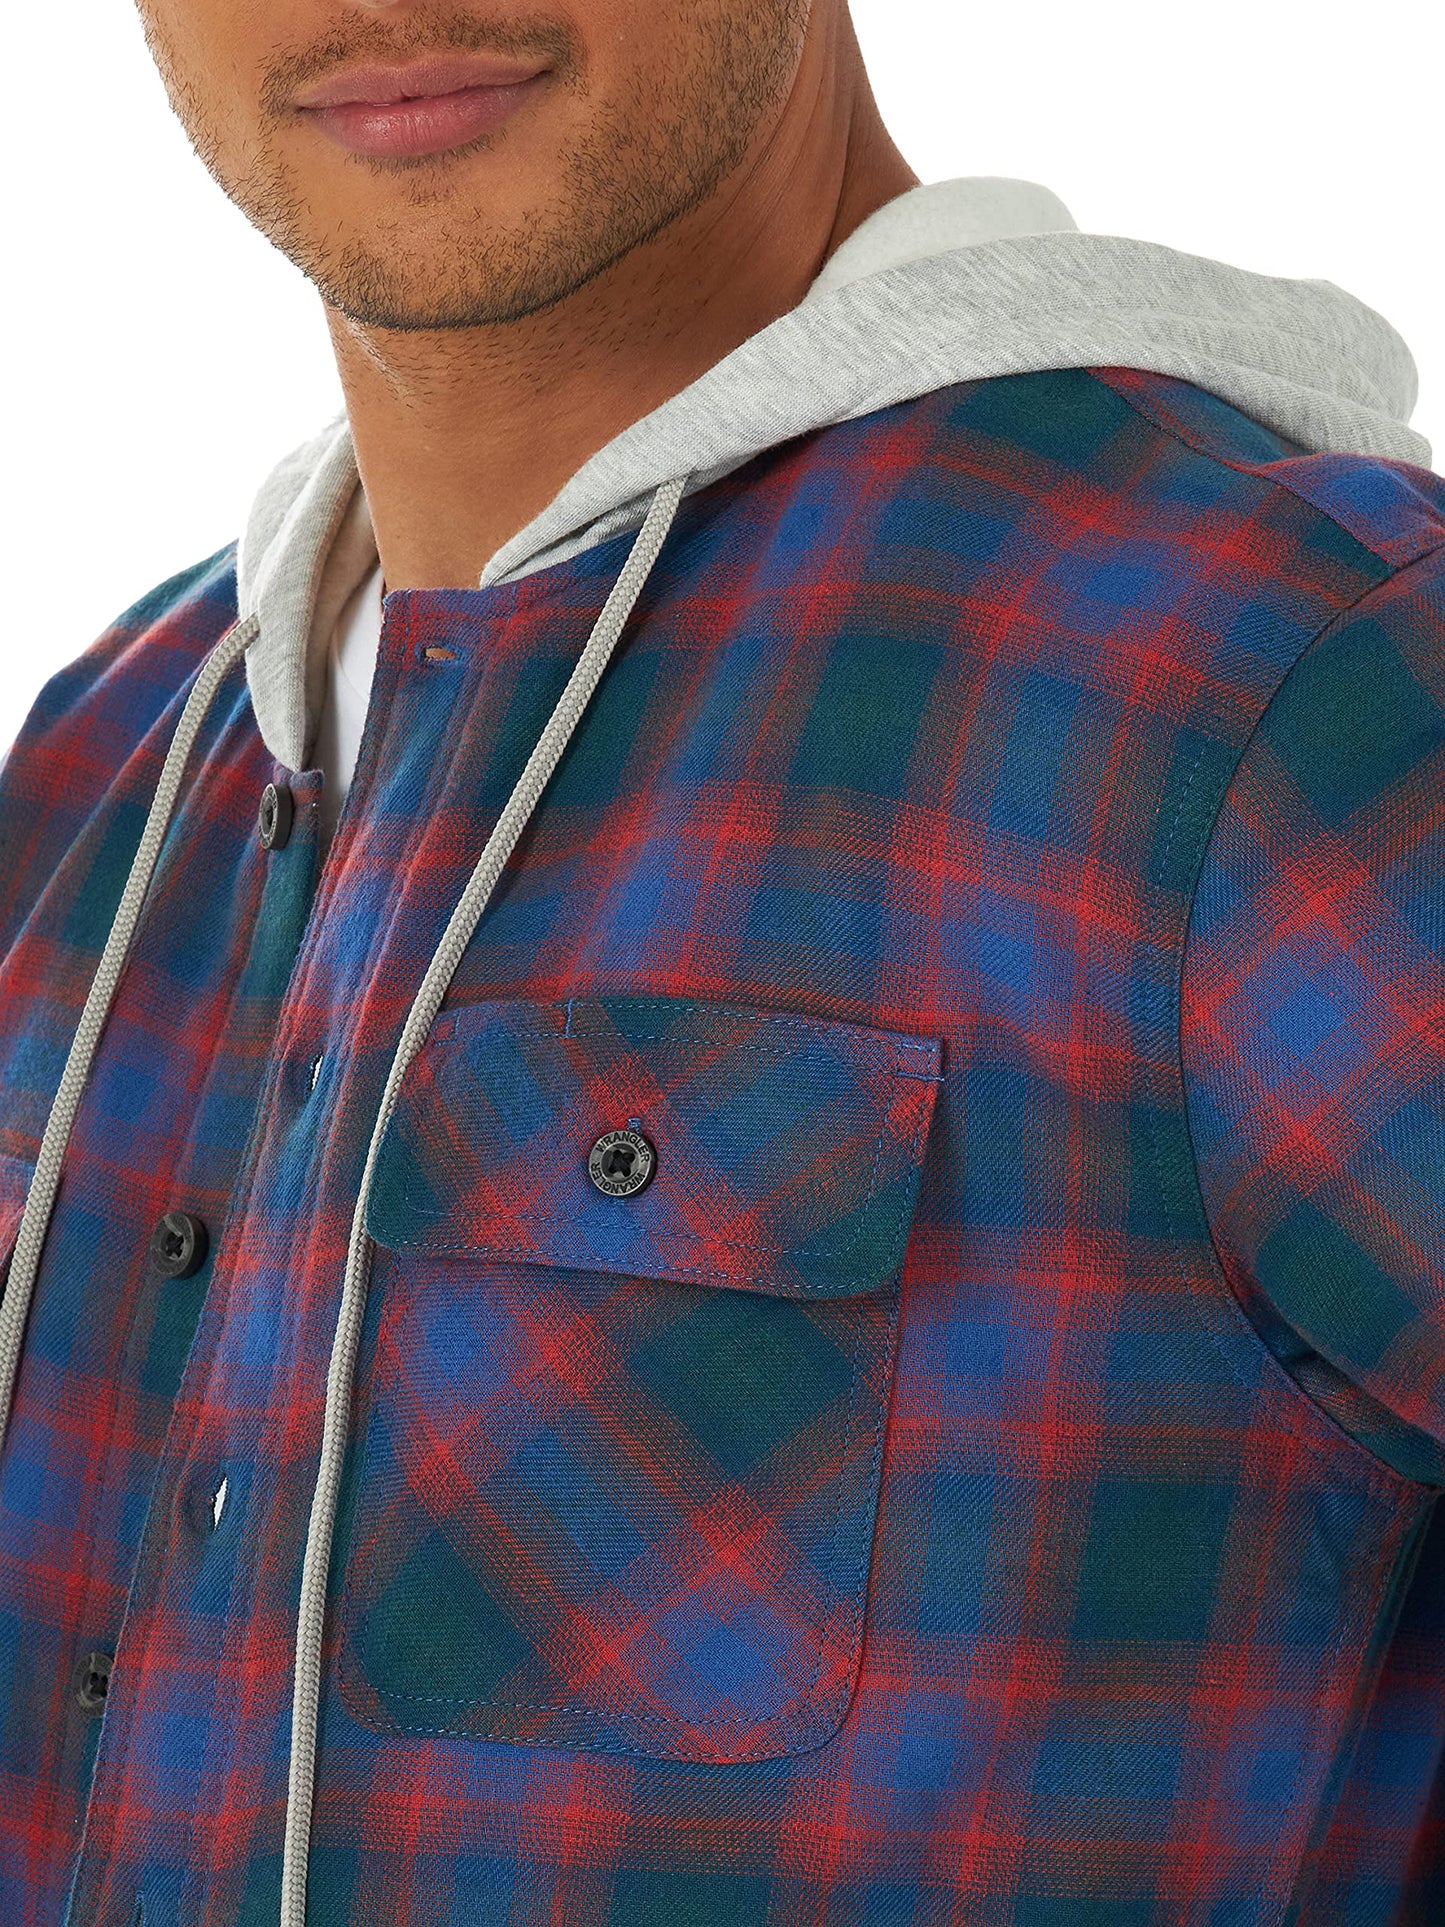 Wrangler Authentics Men's Long Sleeve Quilted Lined Flannel Shirt Jacket with Hood, Blue/Red, Medium